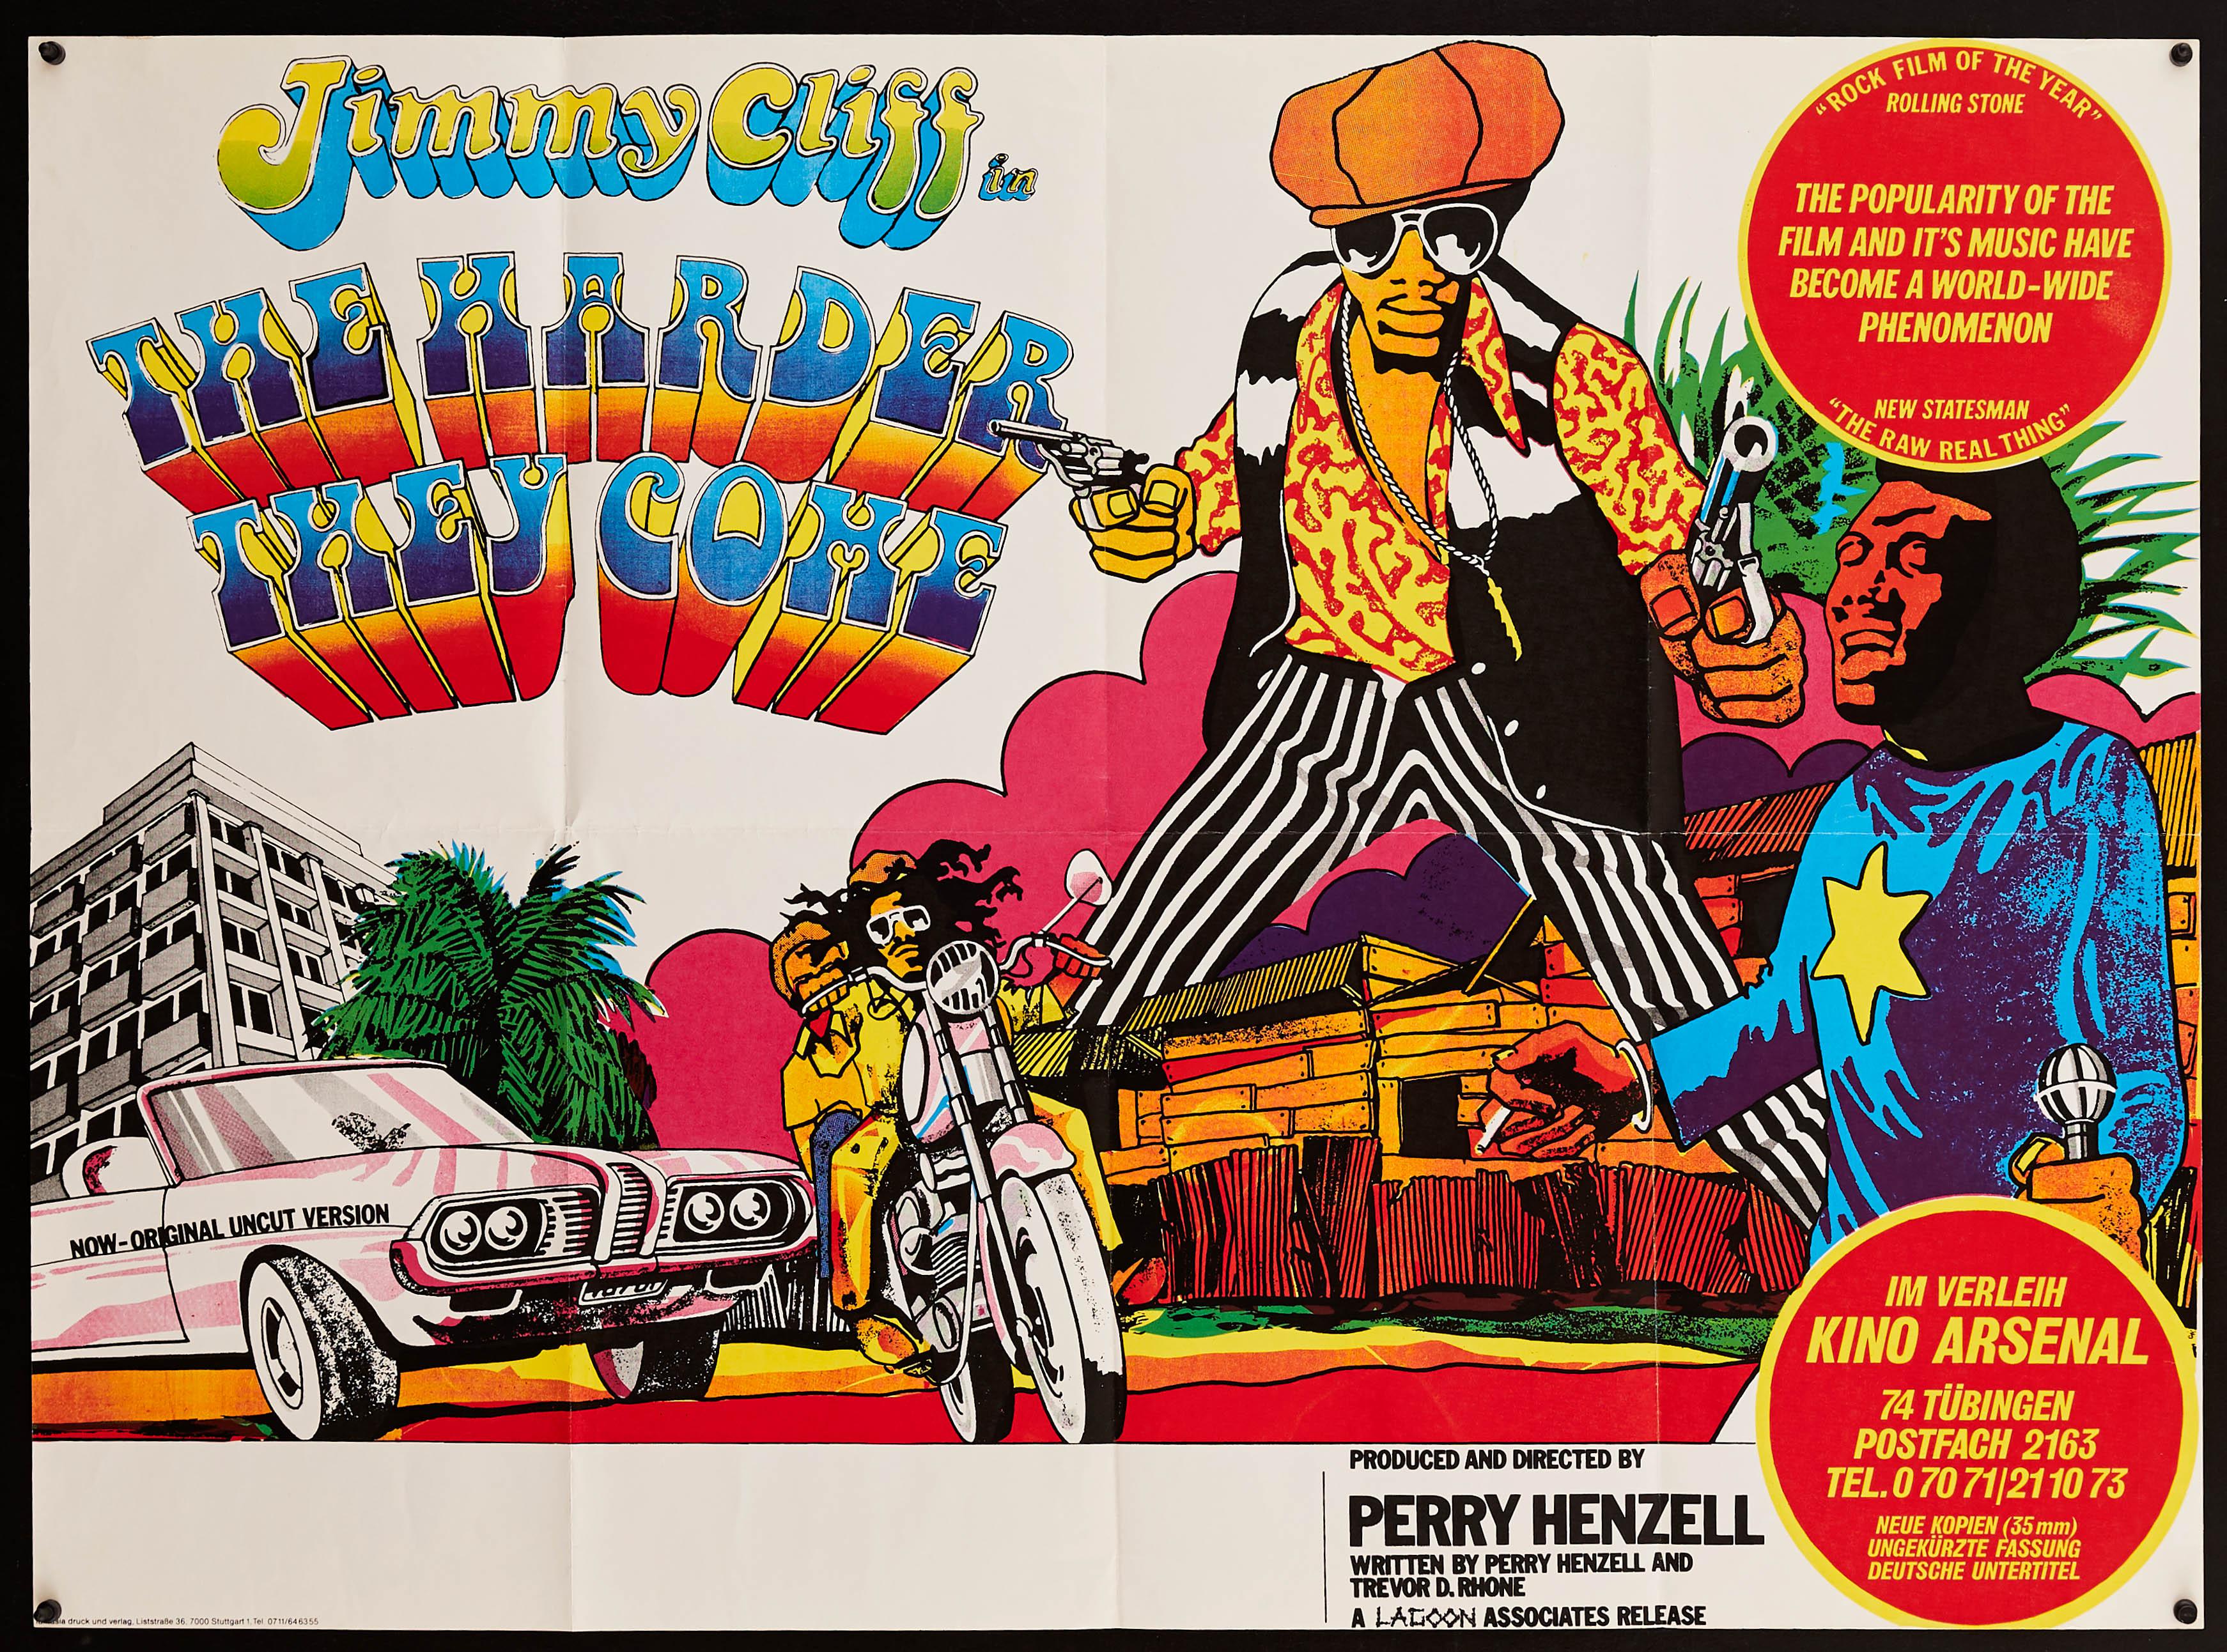 The Harder They Come Movie Poster 1980 27x37 - Film Art Gallery